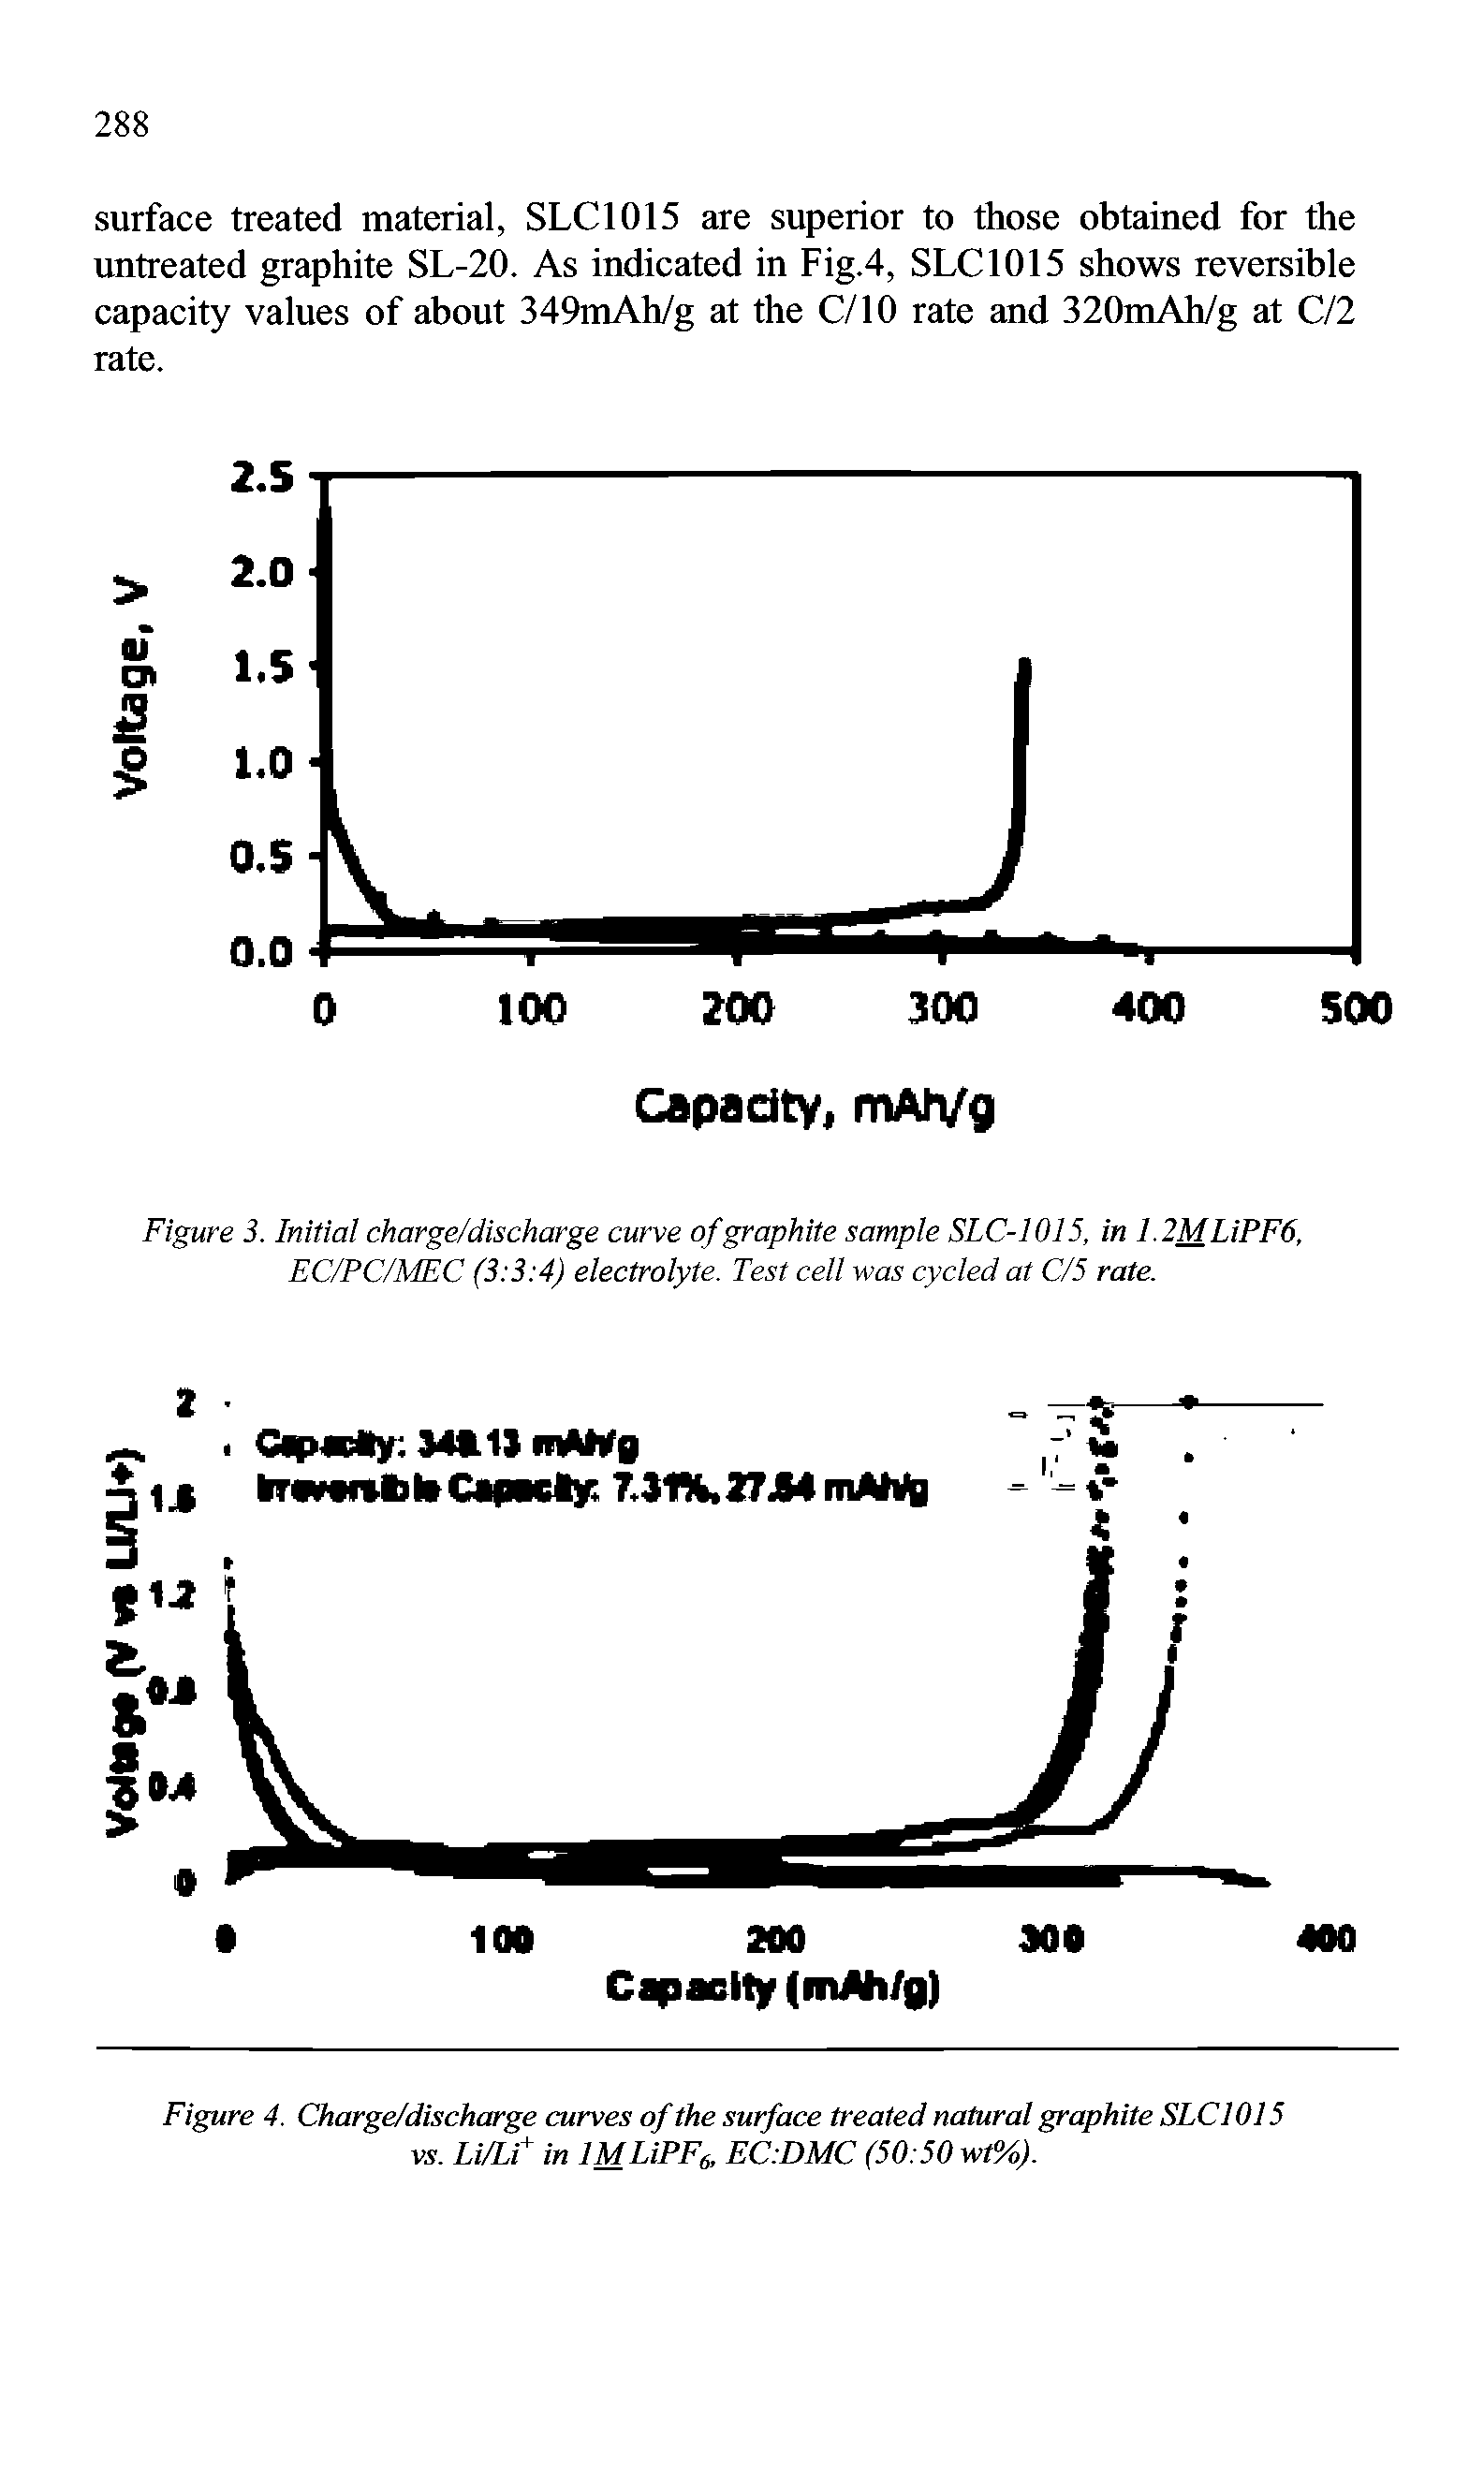 Figure 4. Charge/discharge curves of the surface treated natural graphite SLC1015 vs. Li/Lt in MLiPF6, EC.DMC (50 50 wt%).